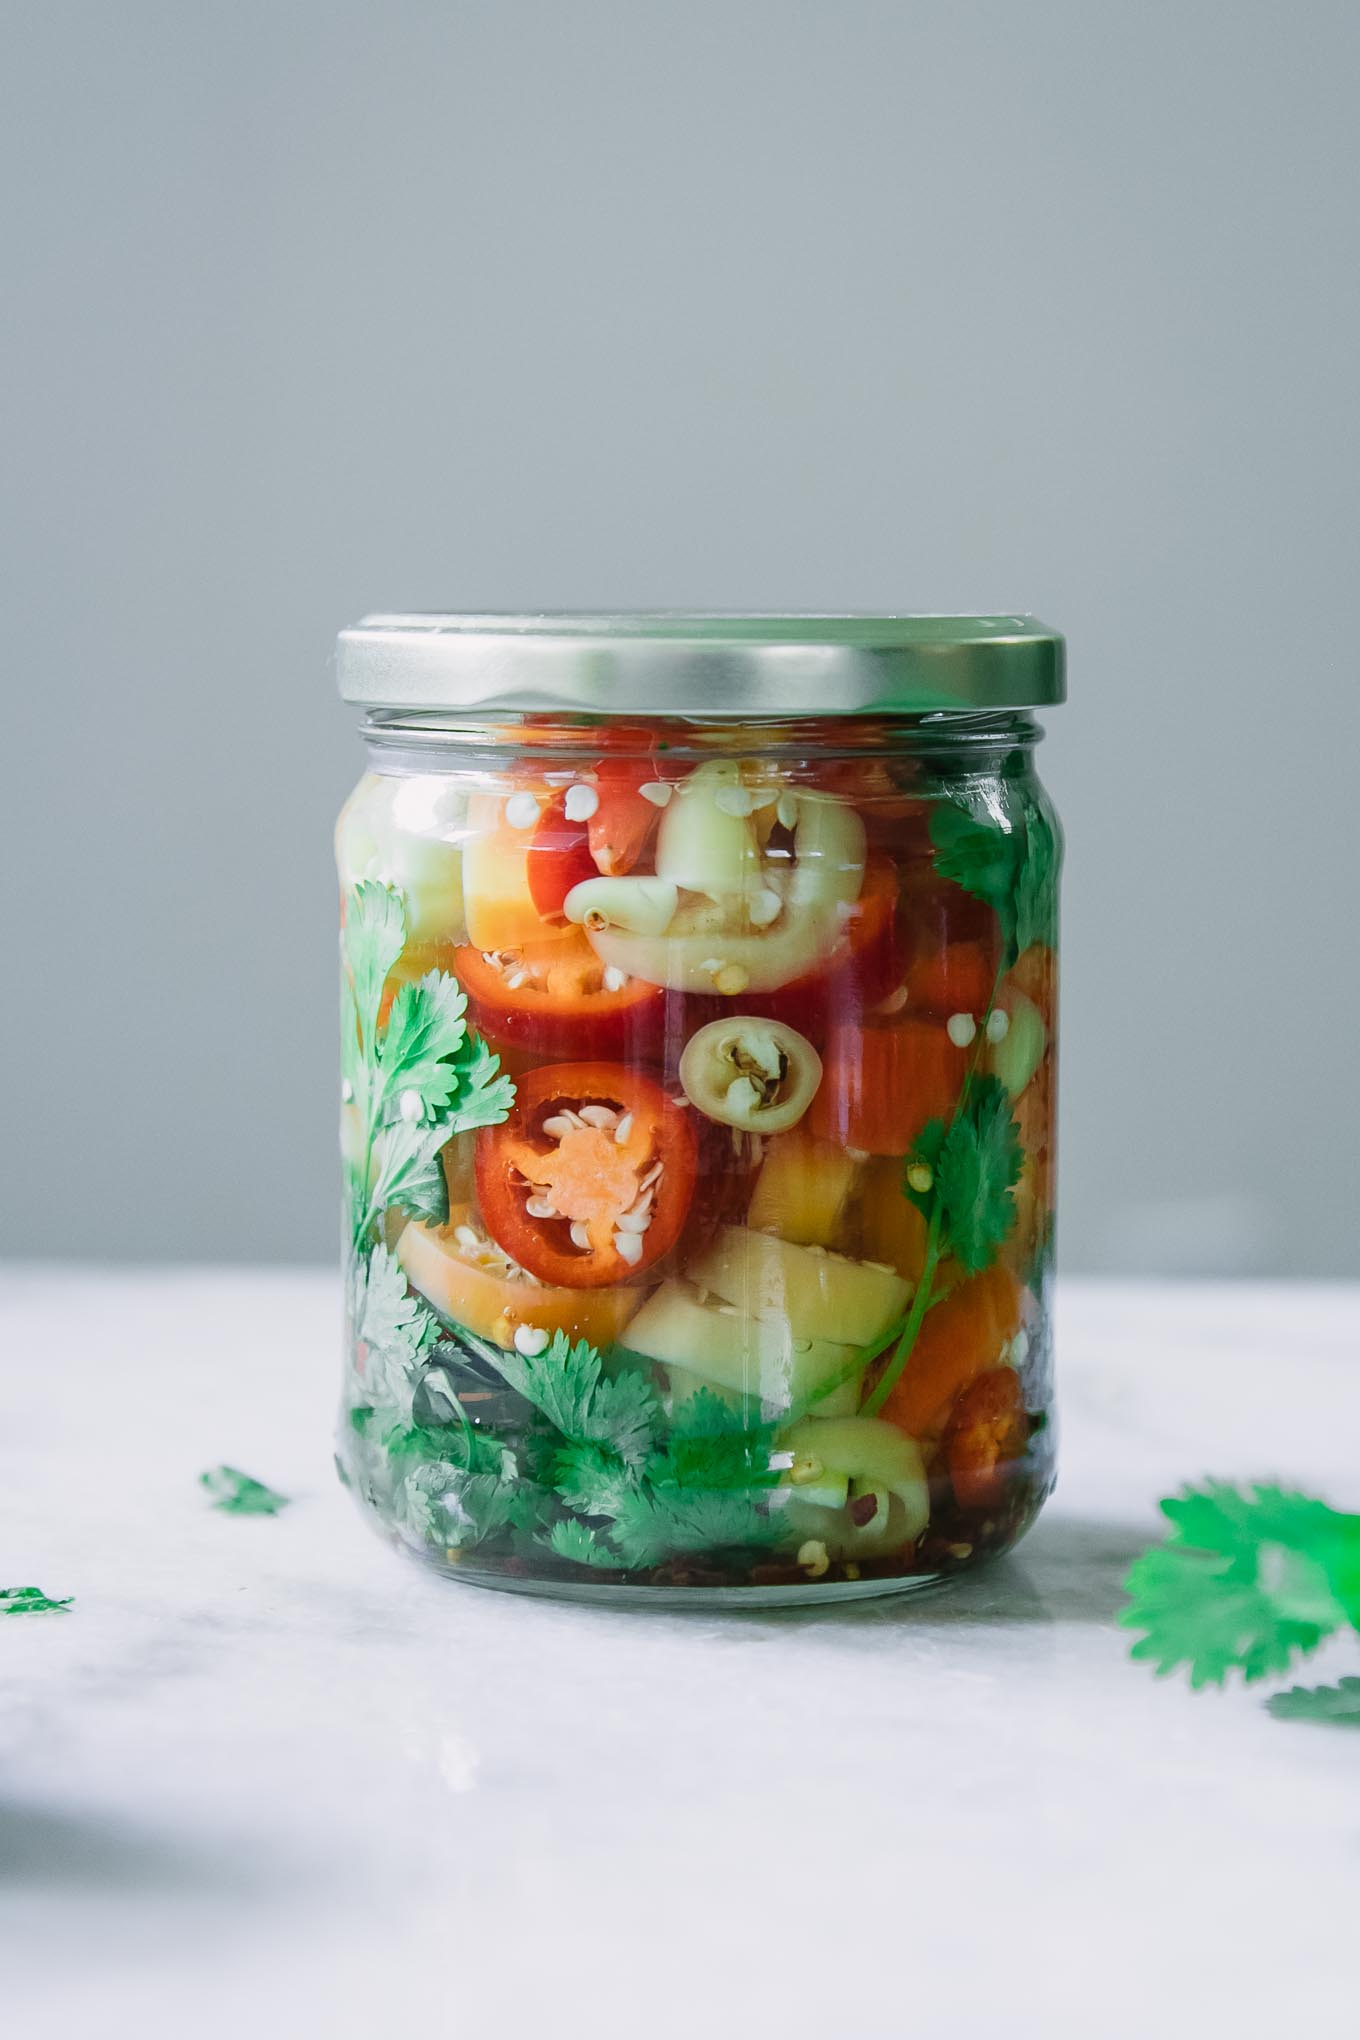 Refrigerator Pickled Peppers (Whole or Sliced) ⋆ No Cooking, No Canning!